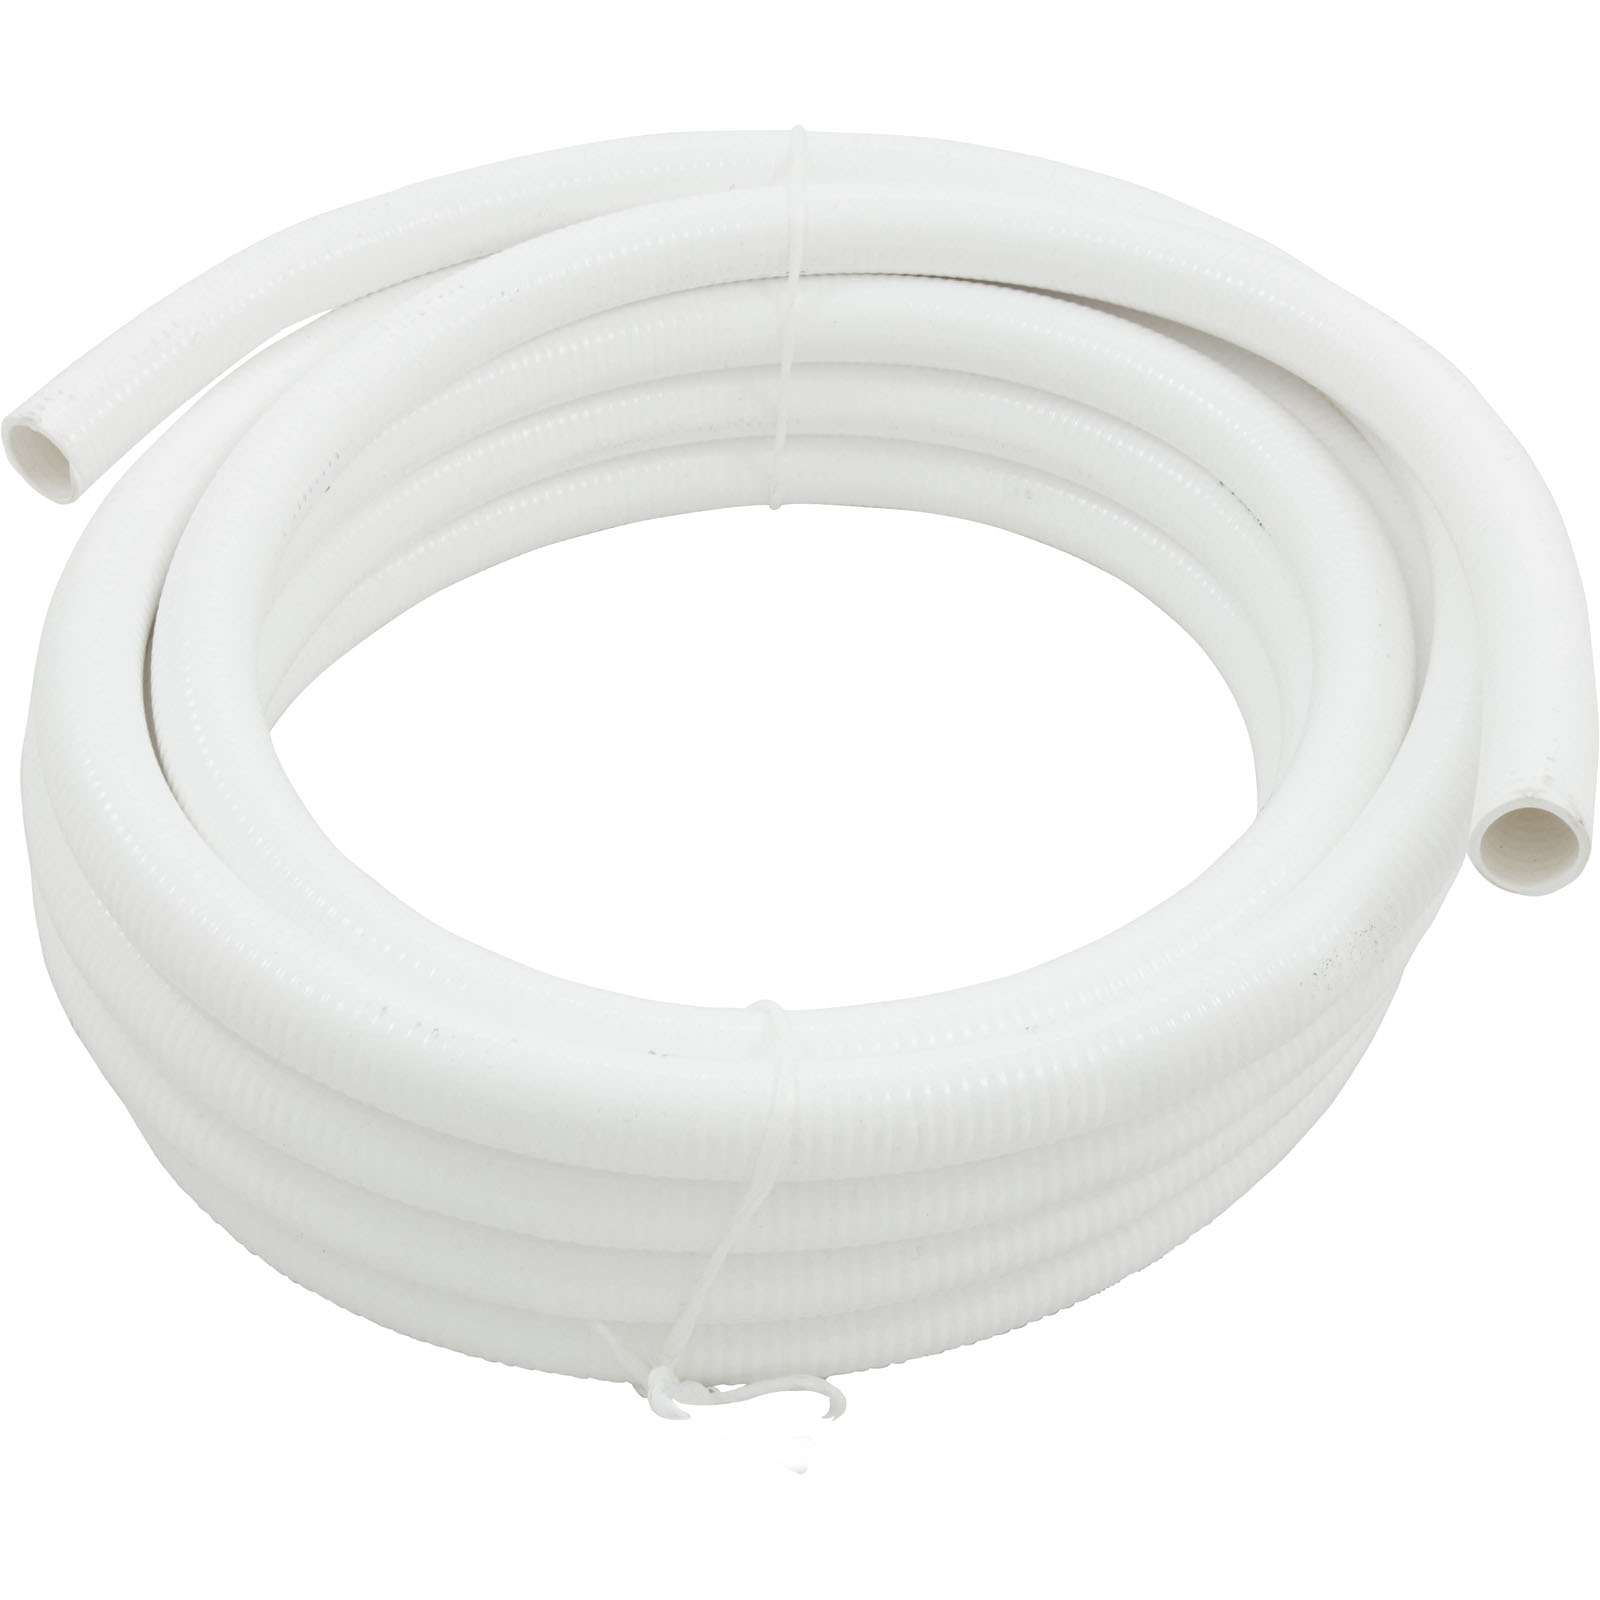 Picture of Flexible PVC Pipe, 3/4" x 25 foot